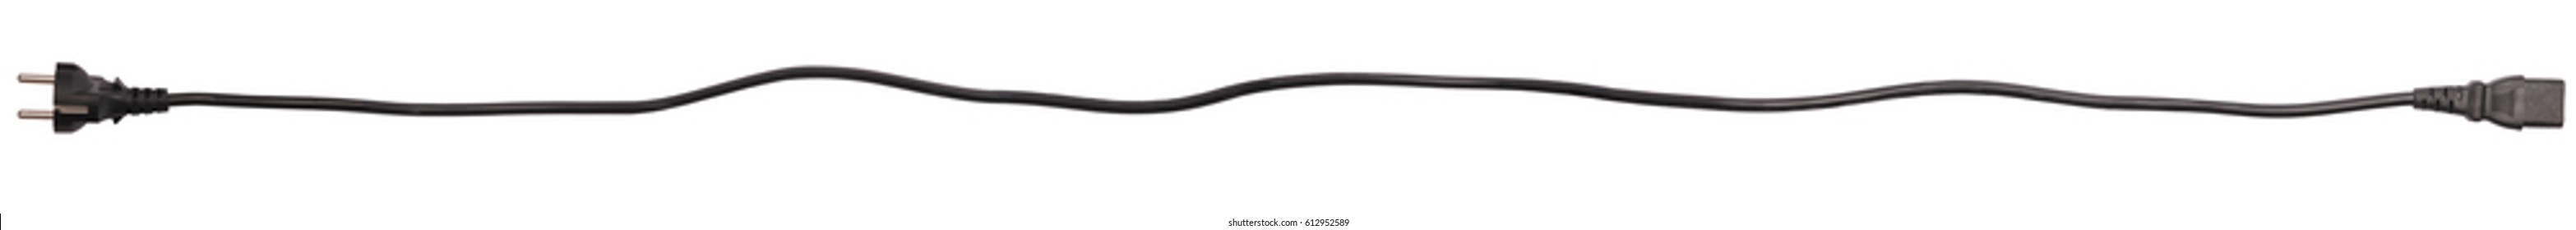 Black power cable with plug and socket isolated on white background 